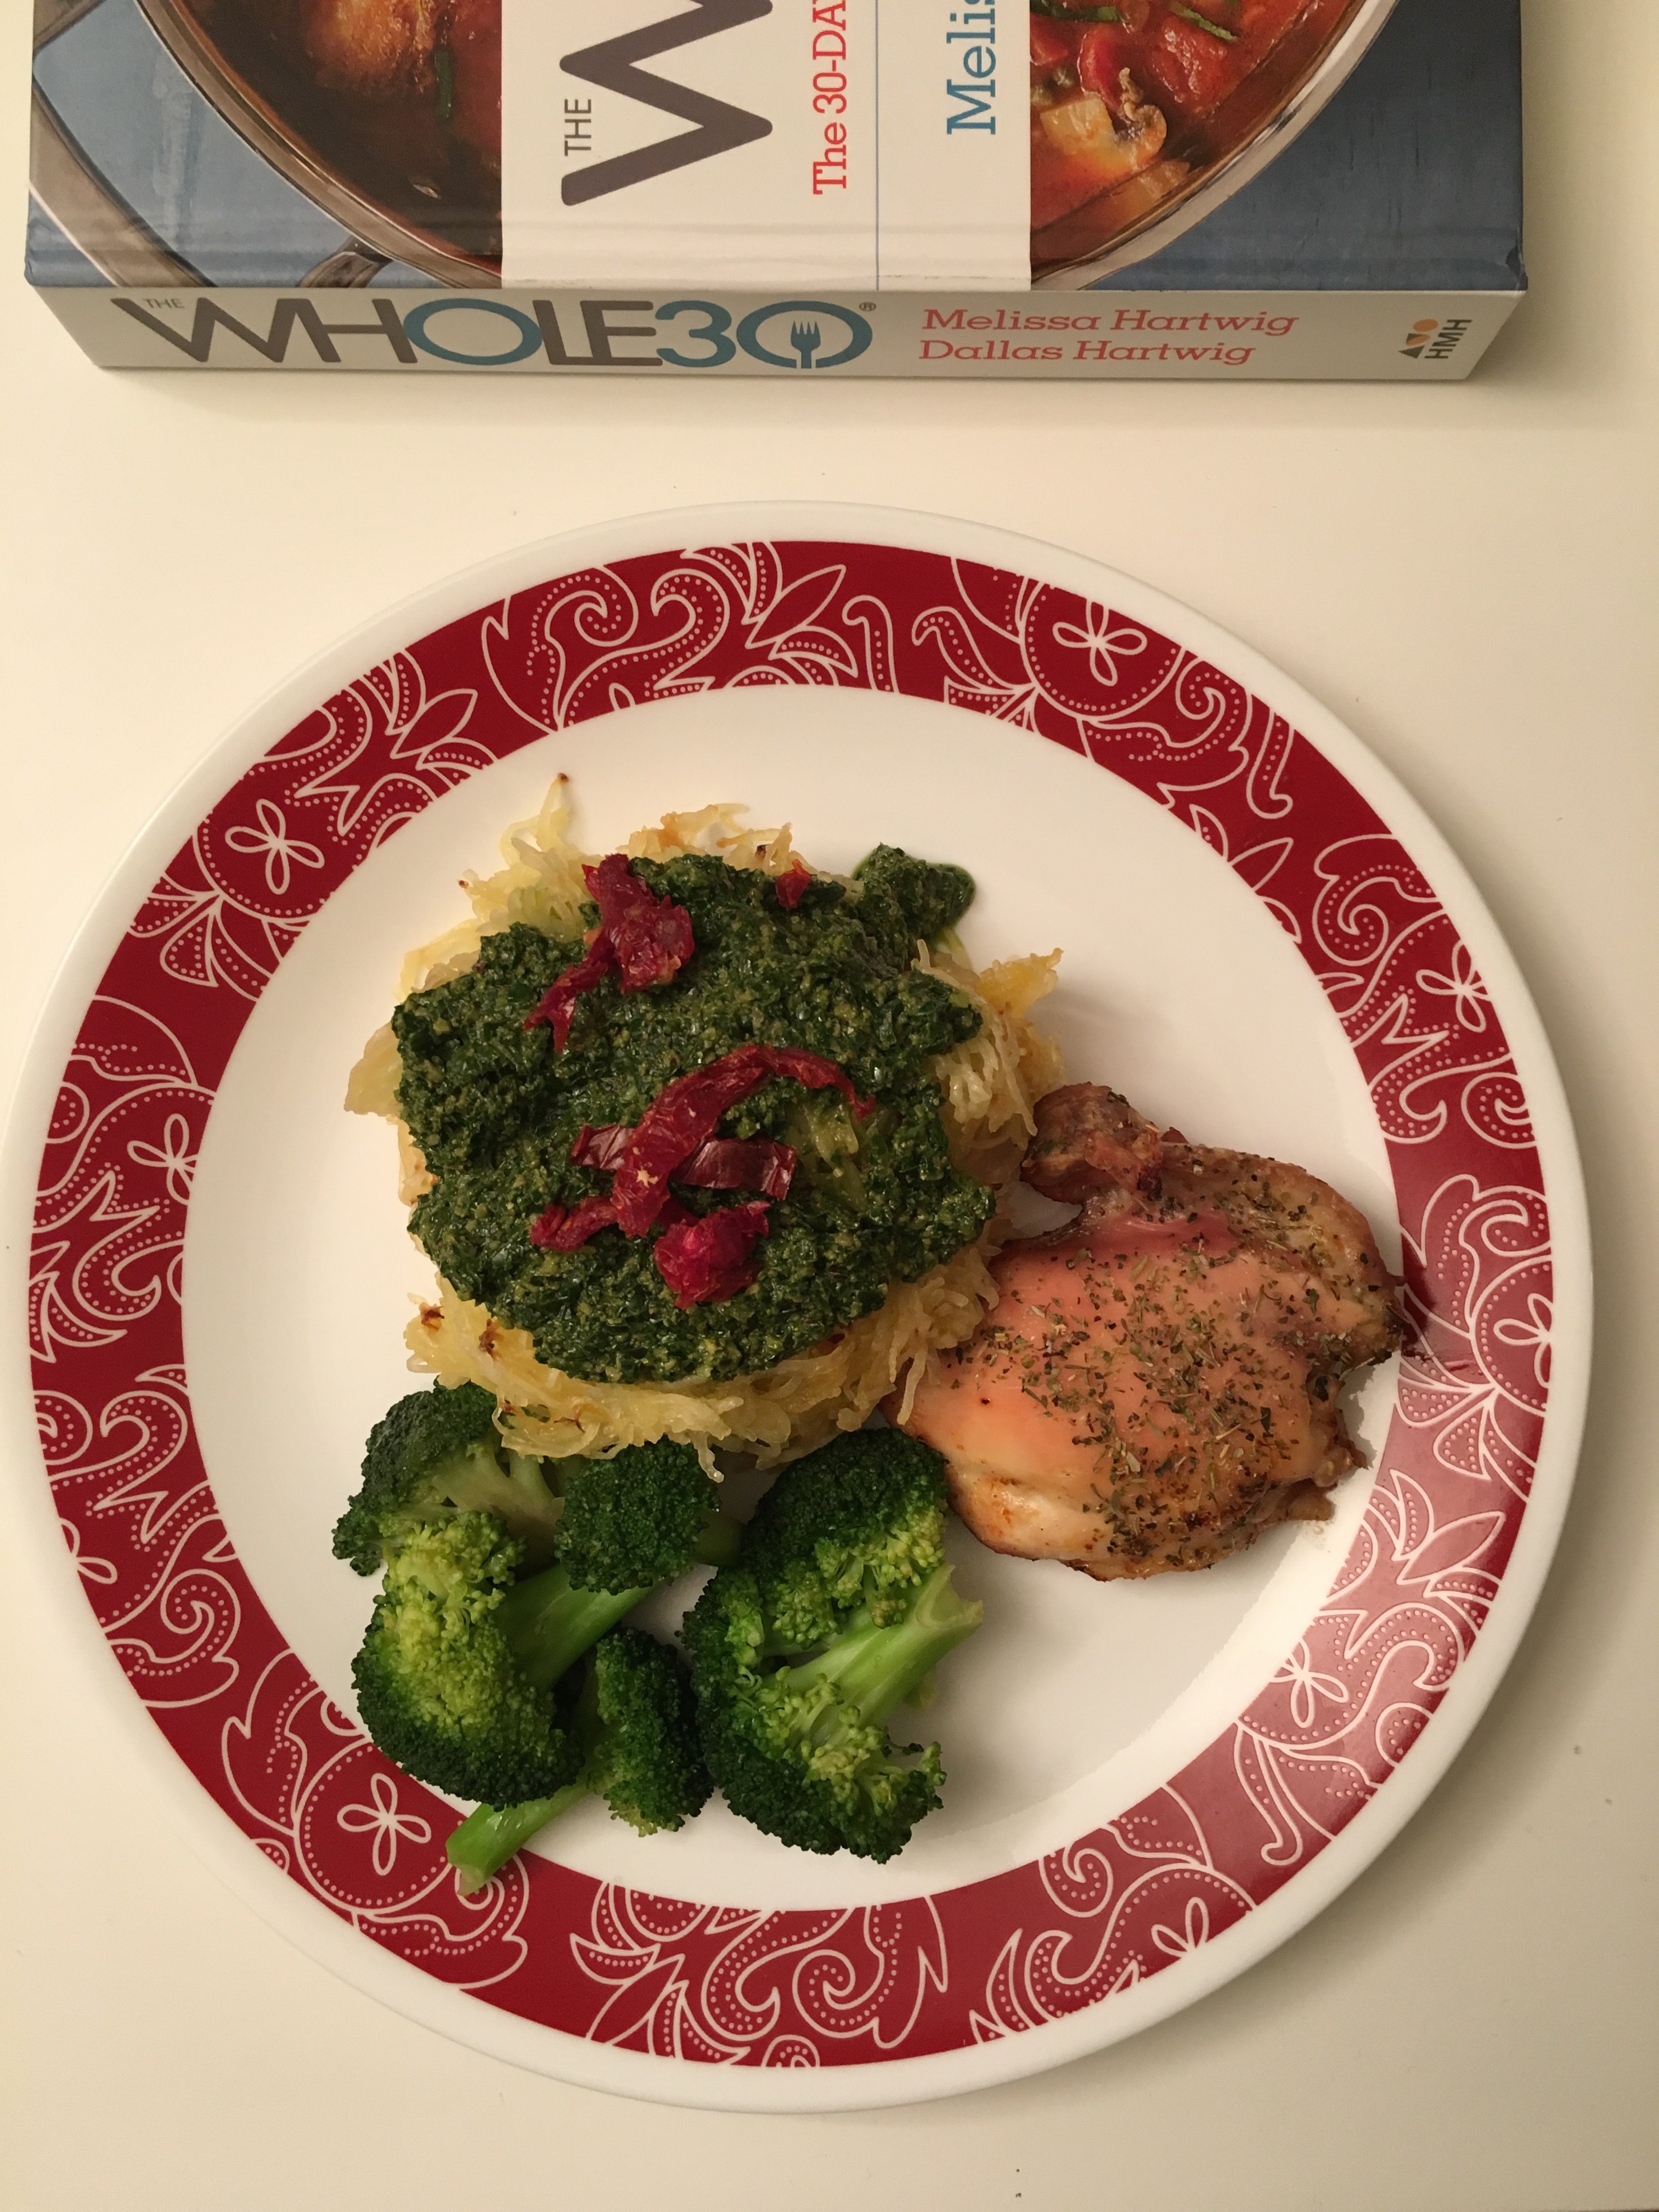 Whole 30 Approved Meal: Spaghetti Squash with Pesto & Baked Chicken Thighs